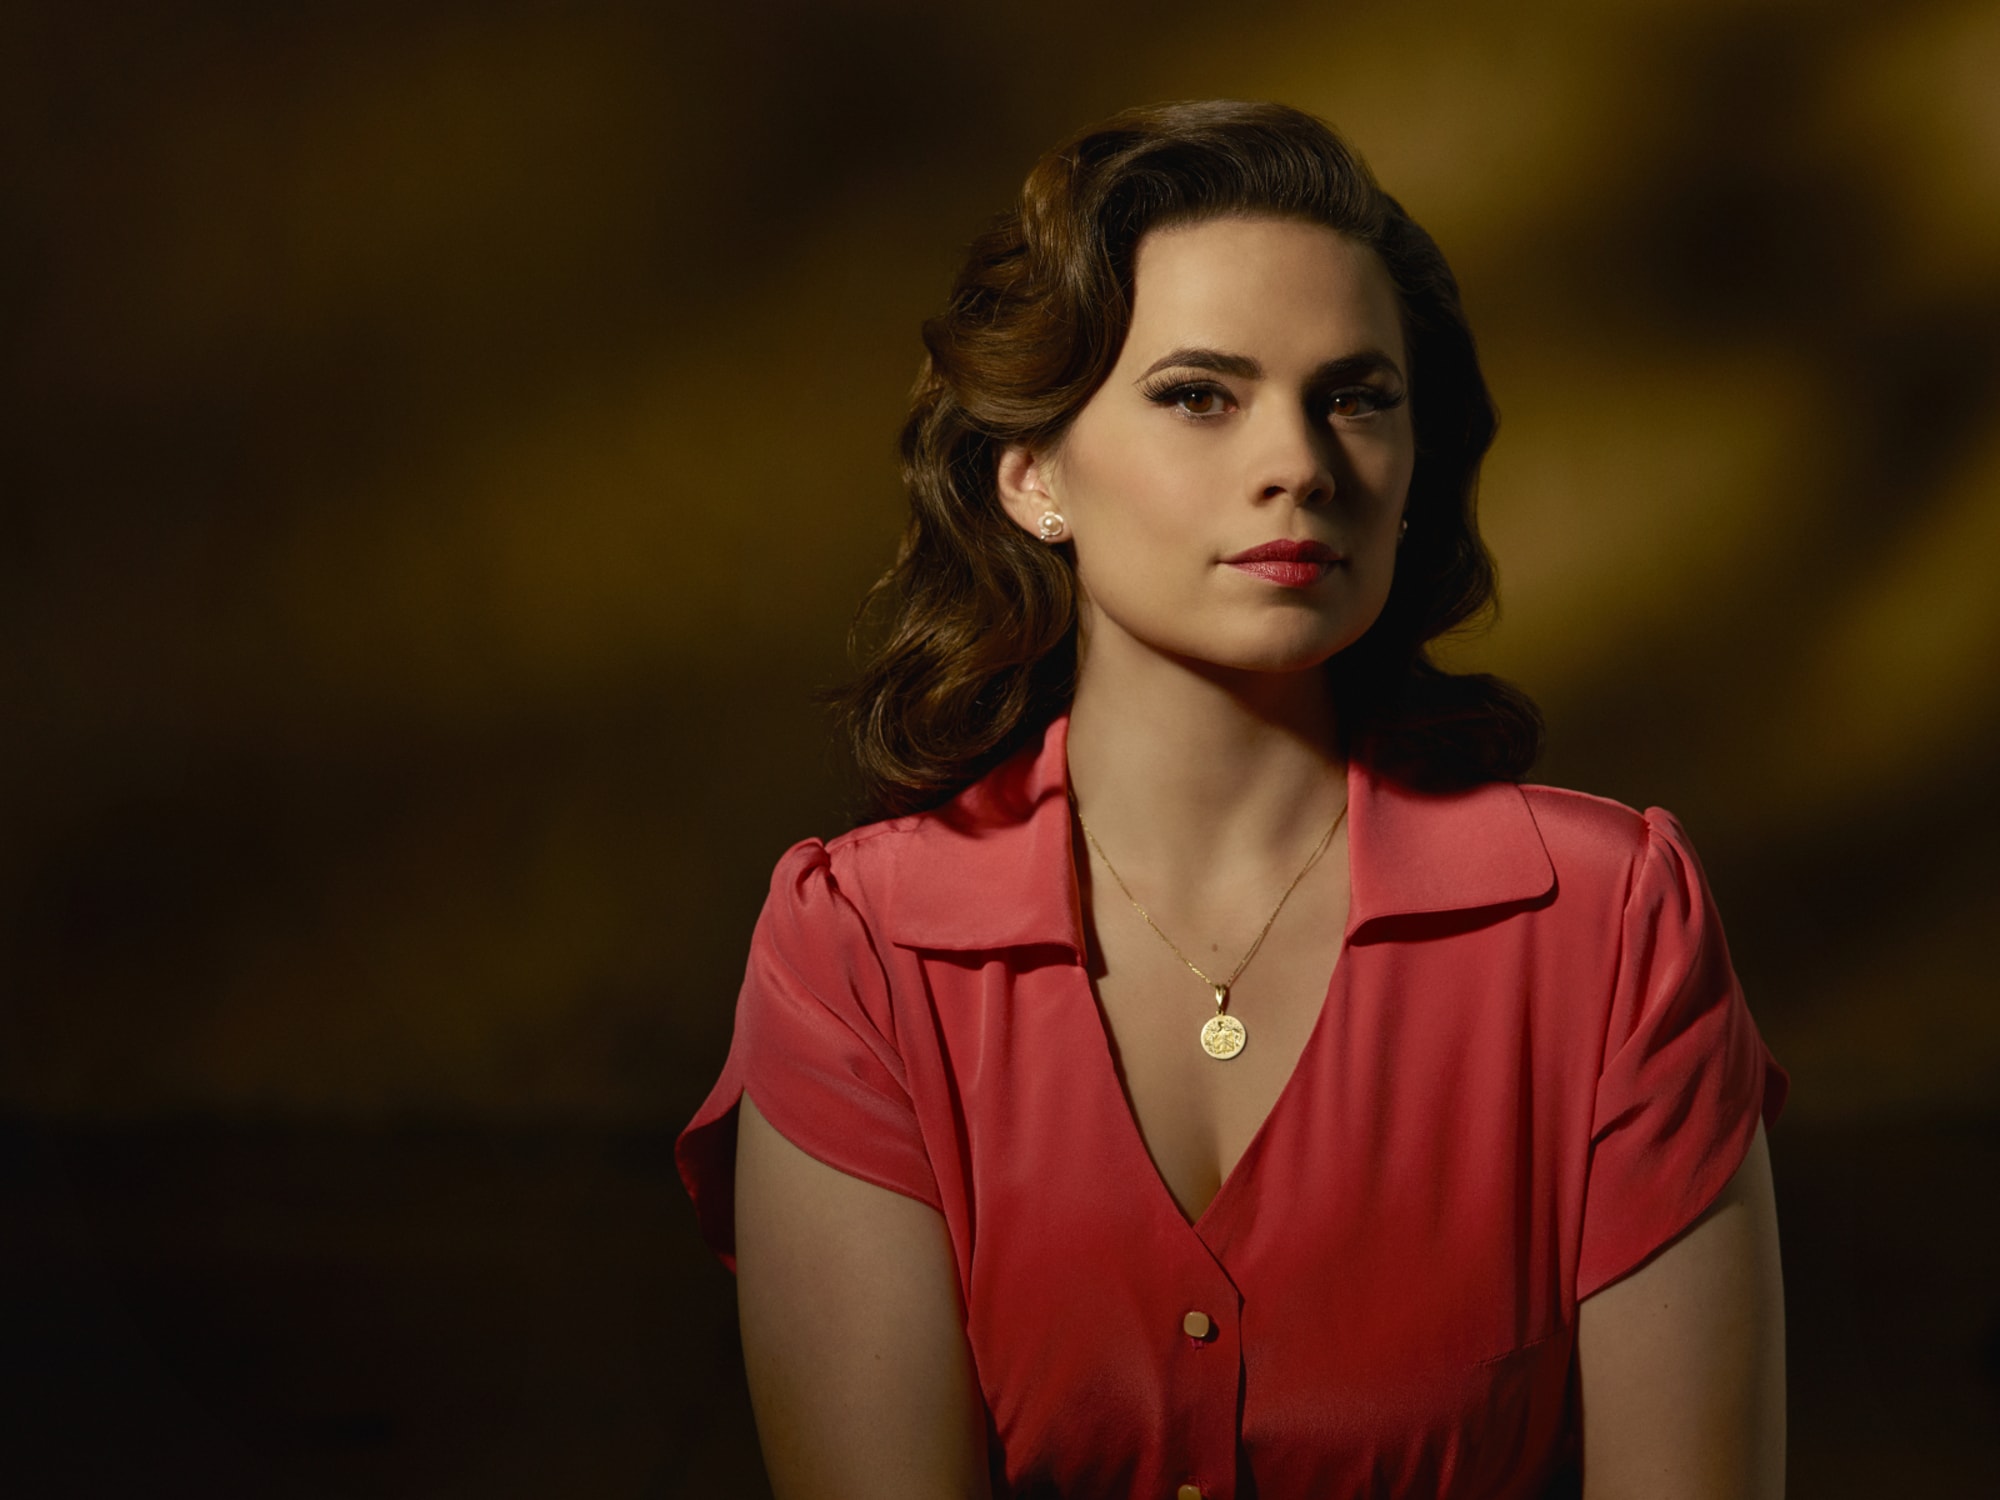 Marvel's 'Agent Carter' Stomps on the Patriarchy